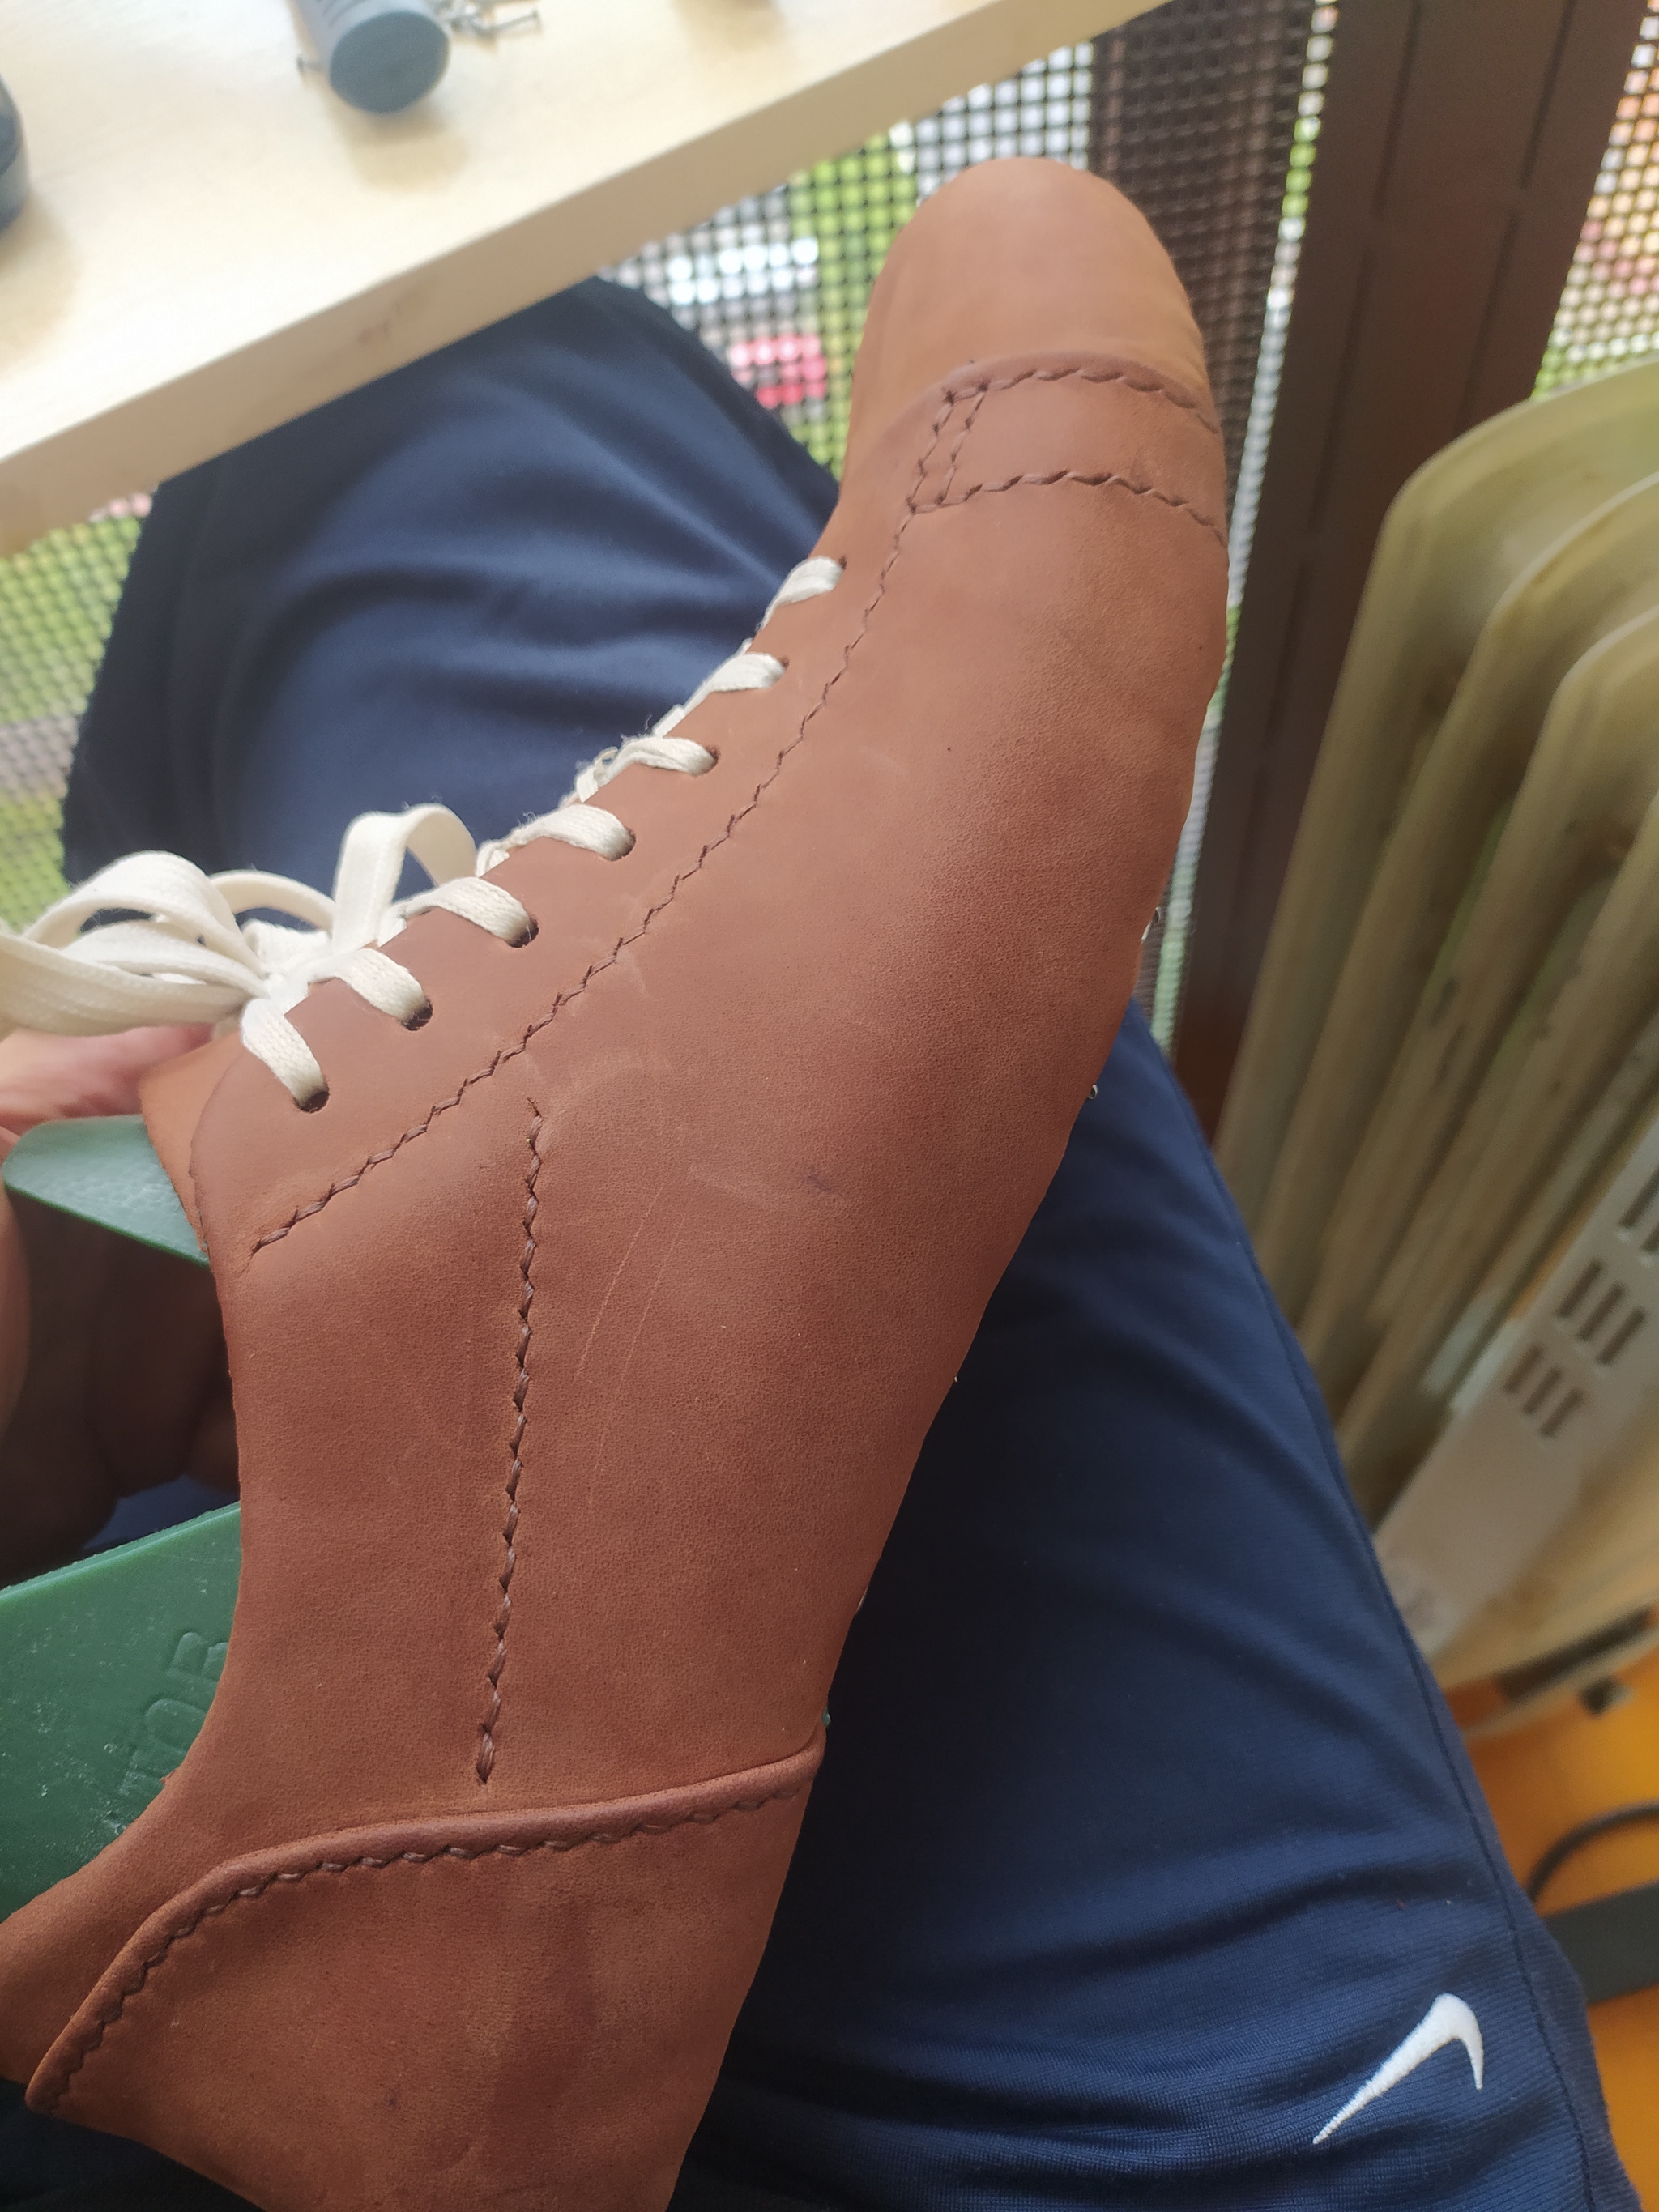 Here are my second shoes (hand sewn) - My, Sneakers, Handmade, Leather products, Shoes, Leather craft, Hobby, Leather, Longpost, Needlework with process